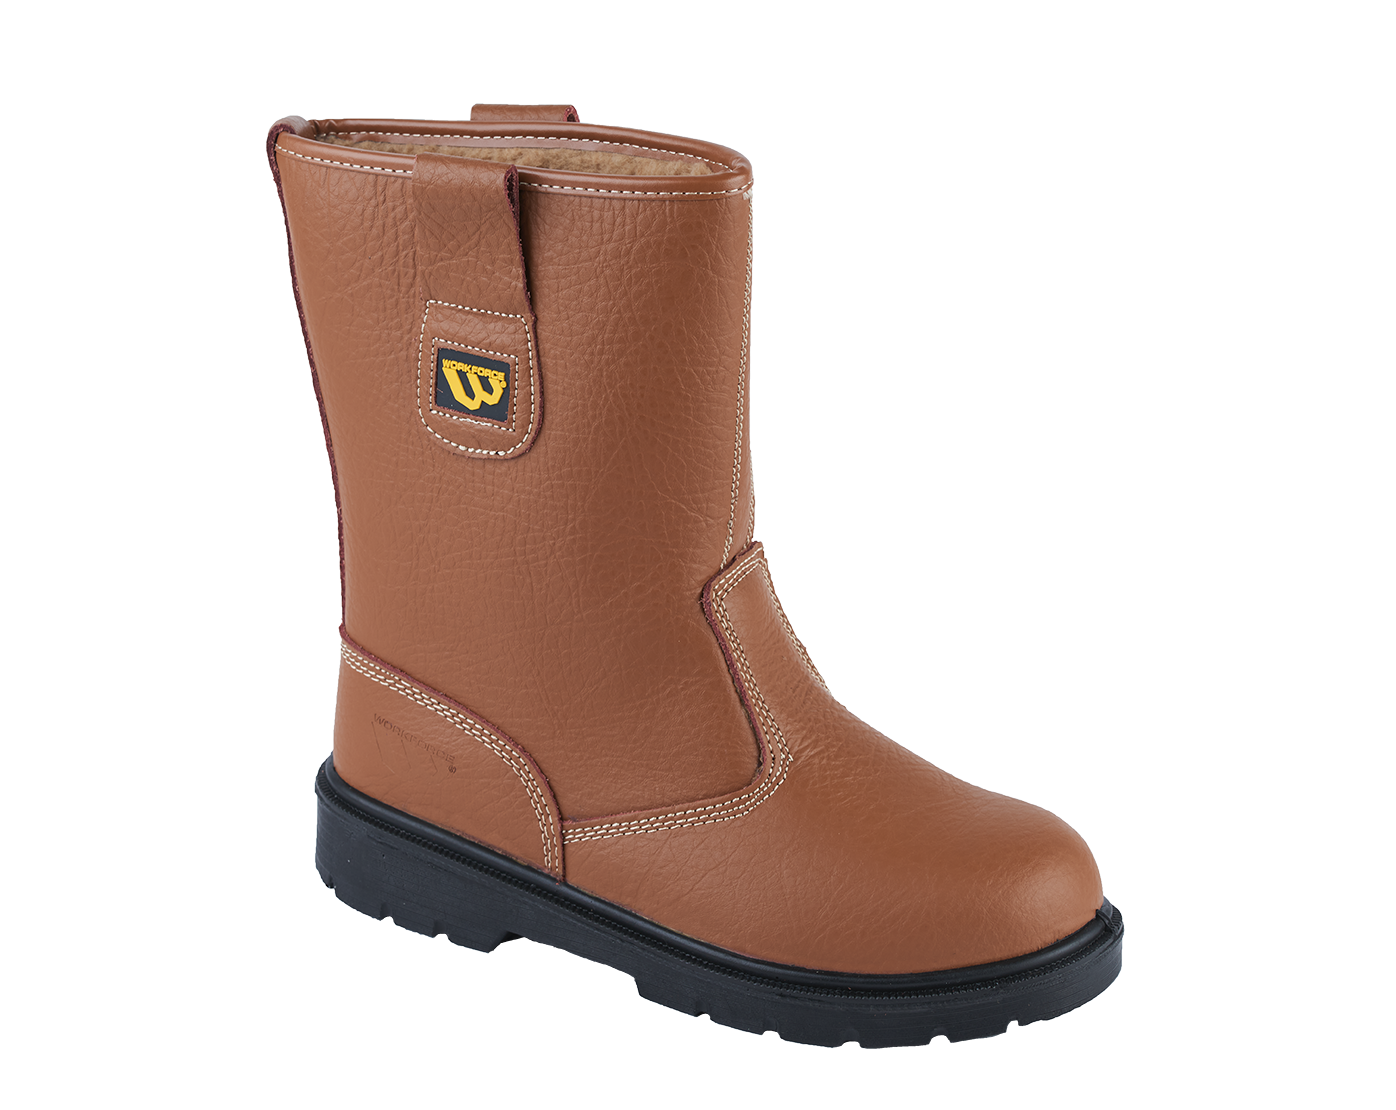 WORKFORCE RIGGER BOOT S1P SRC STURDY & SECURE FOR RUGGED WORK (WF26)